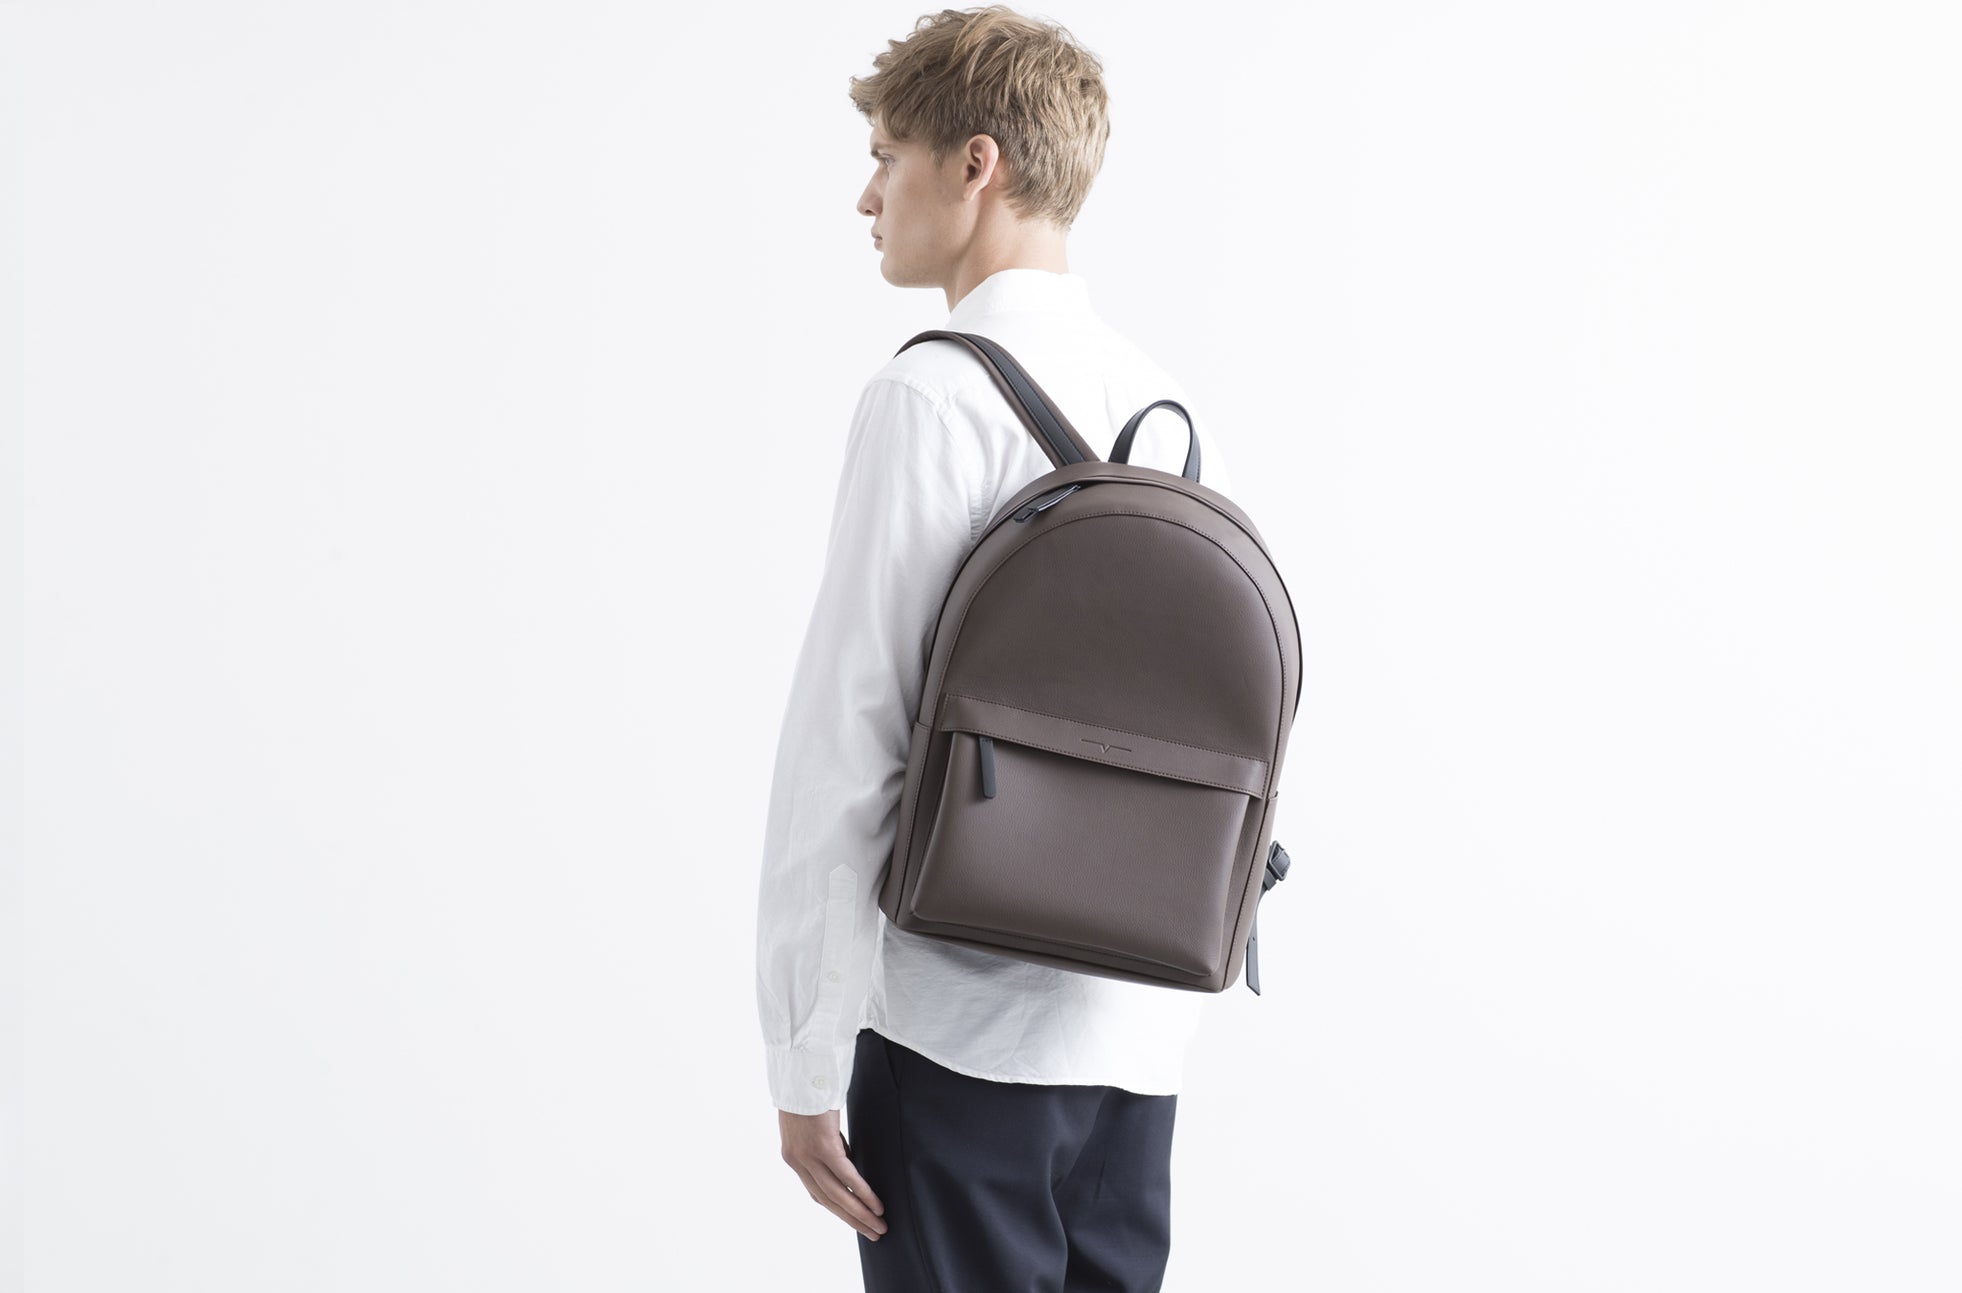 The Classic Backpack in Technik in Taupe and Black image 8